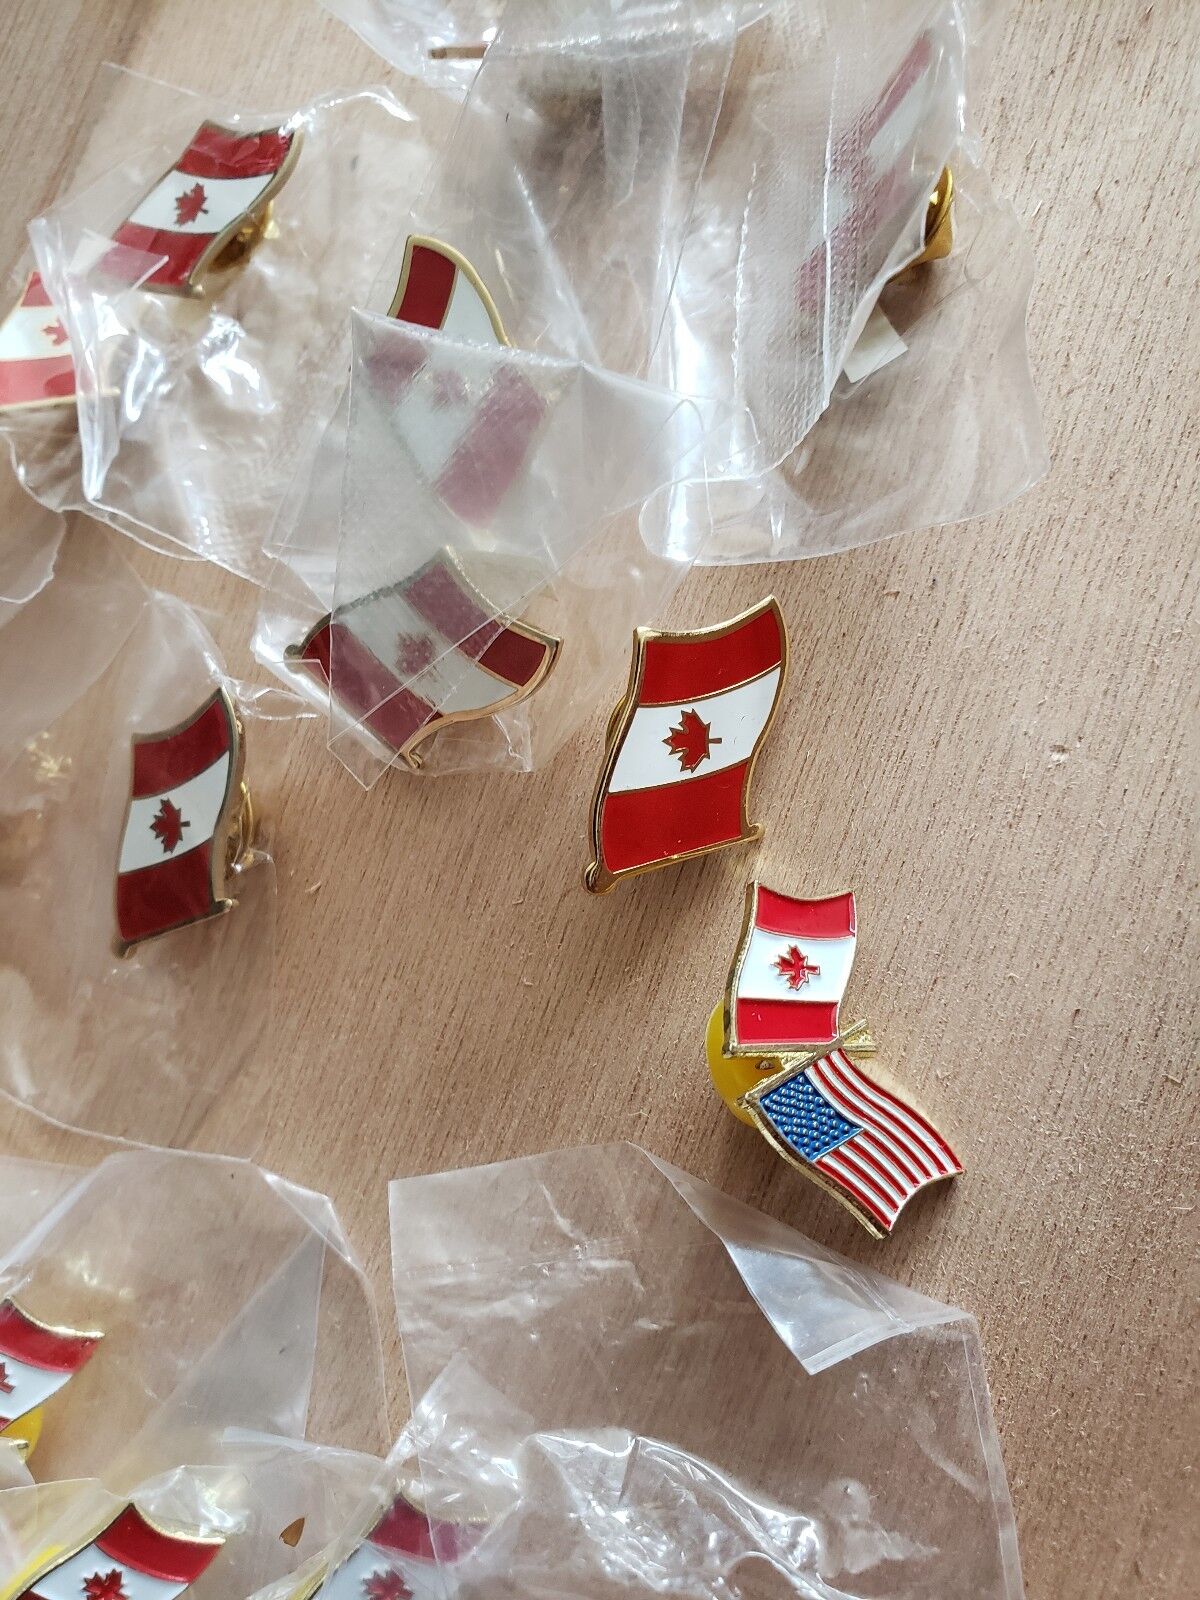 13 Pins 9 CANADA NATIONAL COUNTRY WORLD FLAG 4 CANADA USA COUNTRY FRIENDSHIP